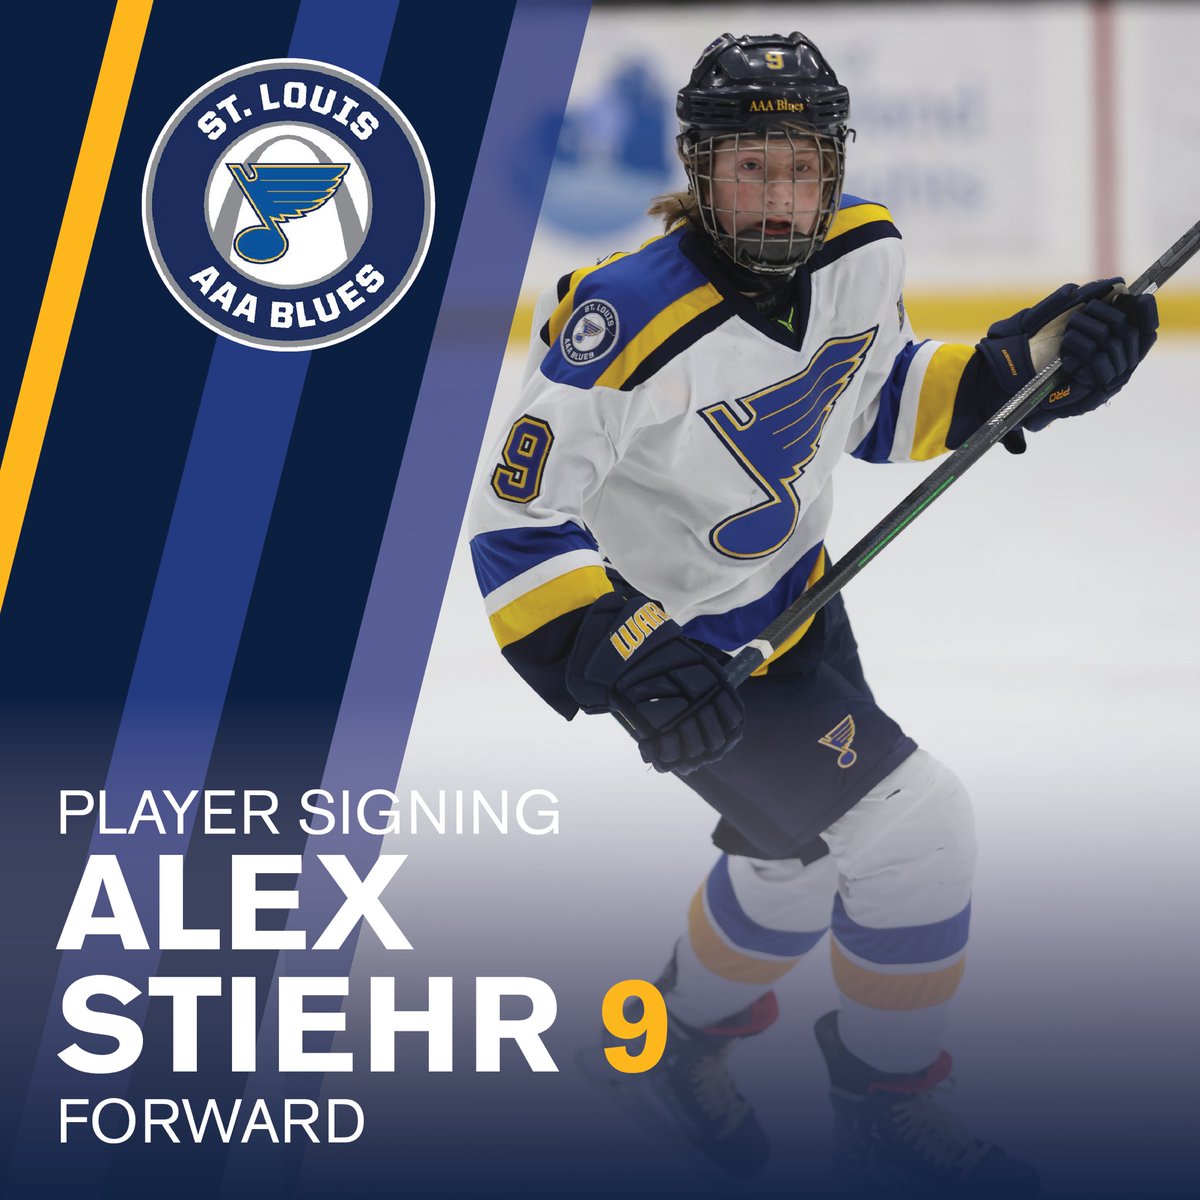 2023-24 Player Signing Announcement: We are excited to welcome back Alex
Stiehr! Alex returns for his 3rd season with the @AAABlues #AAAHockey #BantamMinor